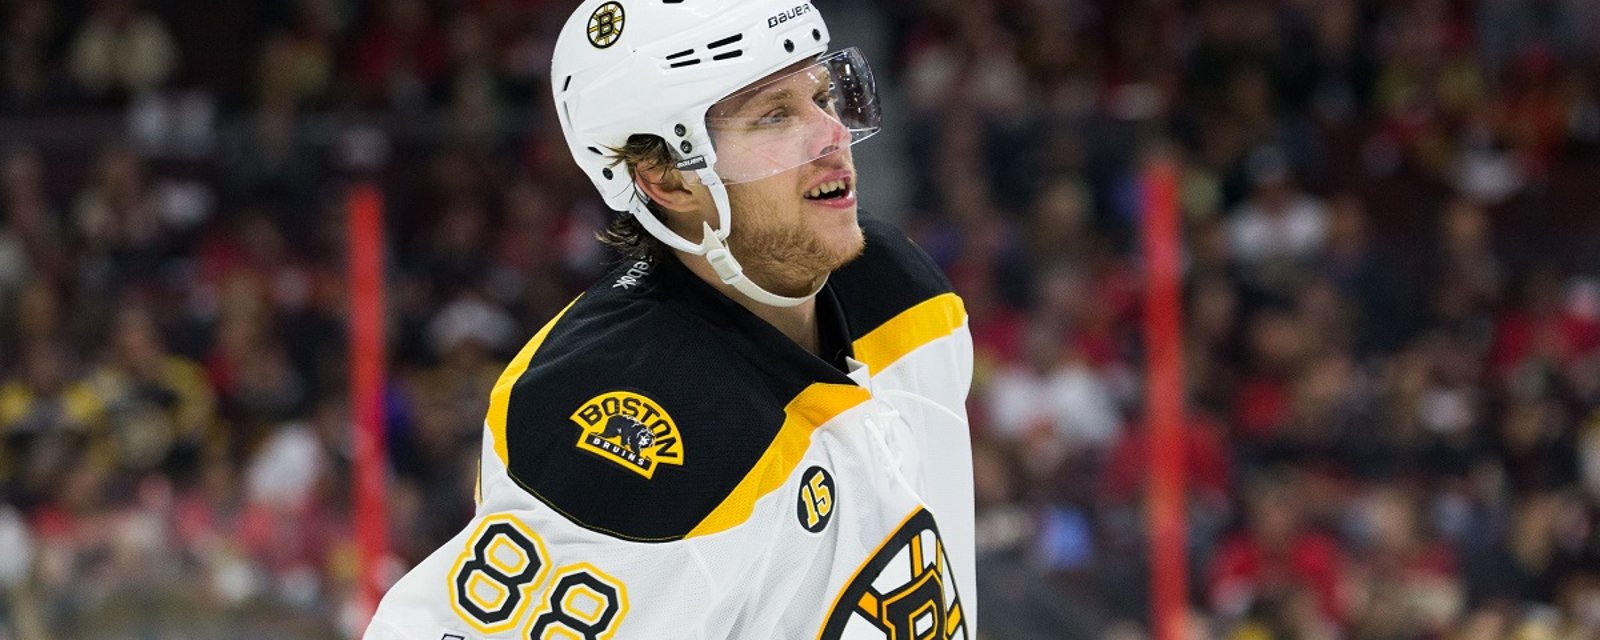 Breaking: Source claims Pastrnak rumors are coming from within the Bruins organization.